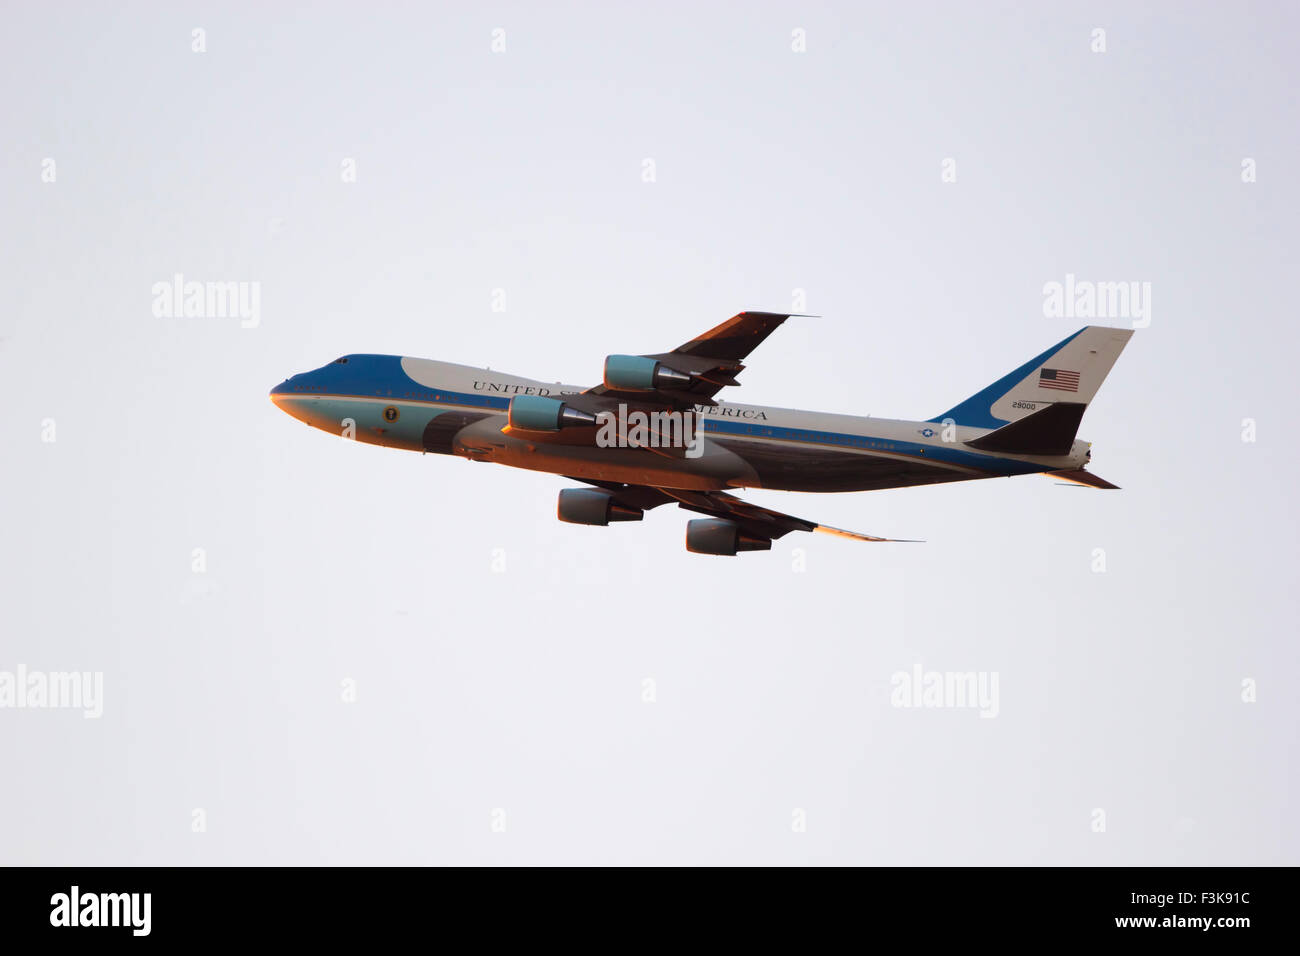 Air Force One, the presidential aircraft taking of from Knoxville, TN. Stock Photo